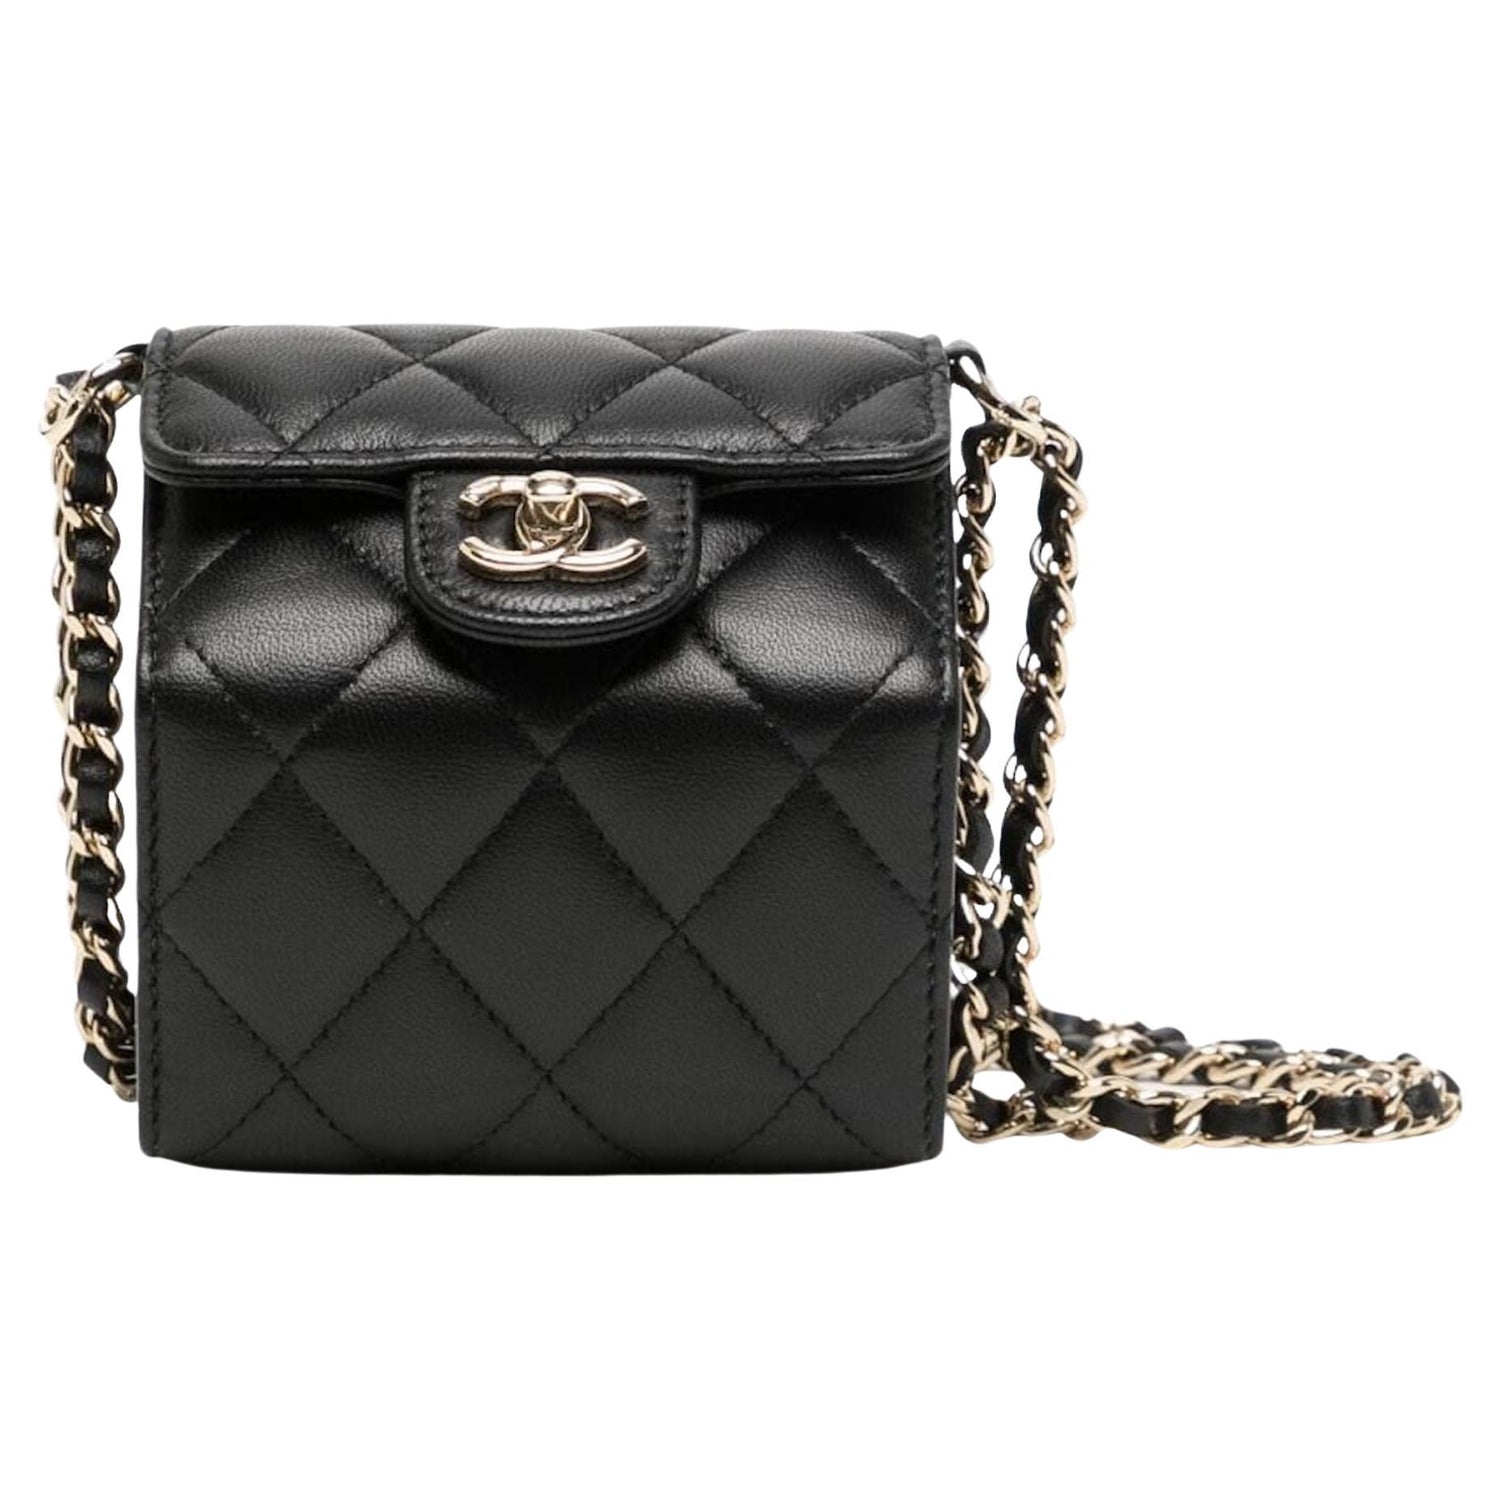 Chanel Navy Blue Quilted Leather 31 Rue Cambon Flap Bag